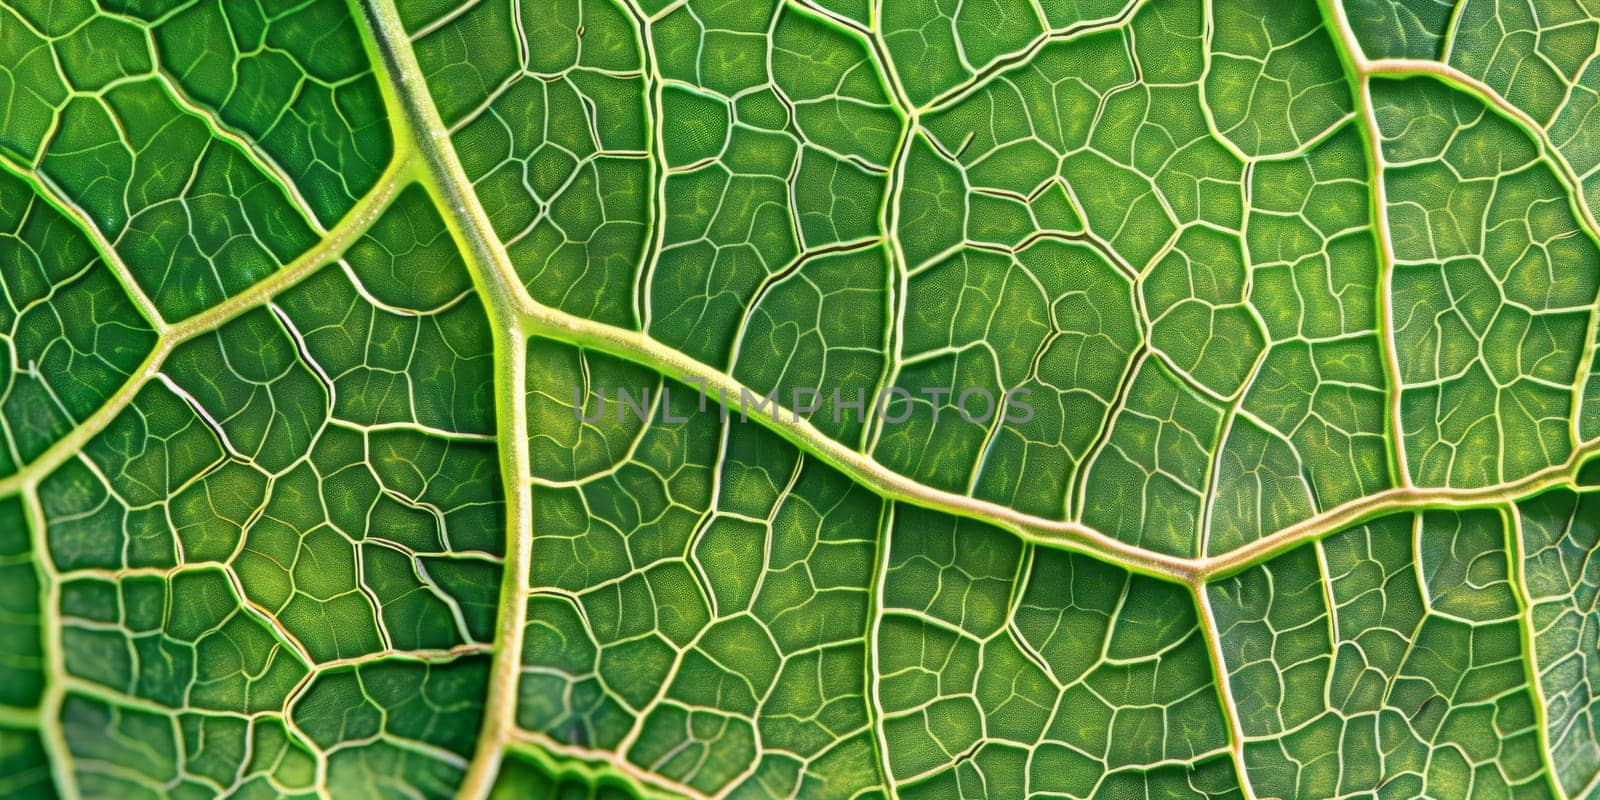 Complex network of veins in a leaf, tracing their paths and connections by Kadula